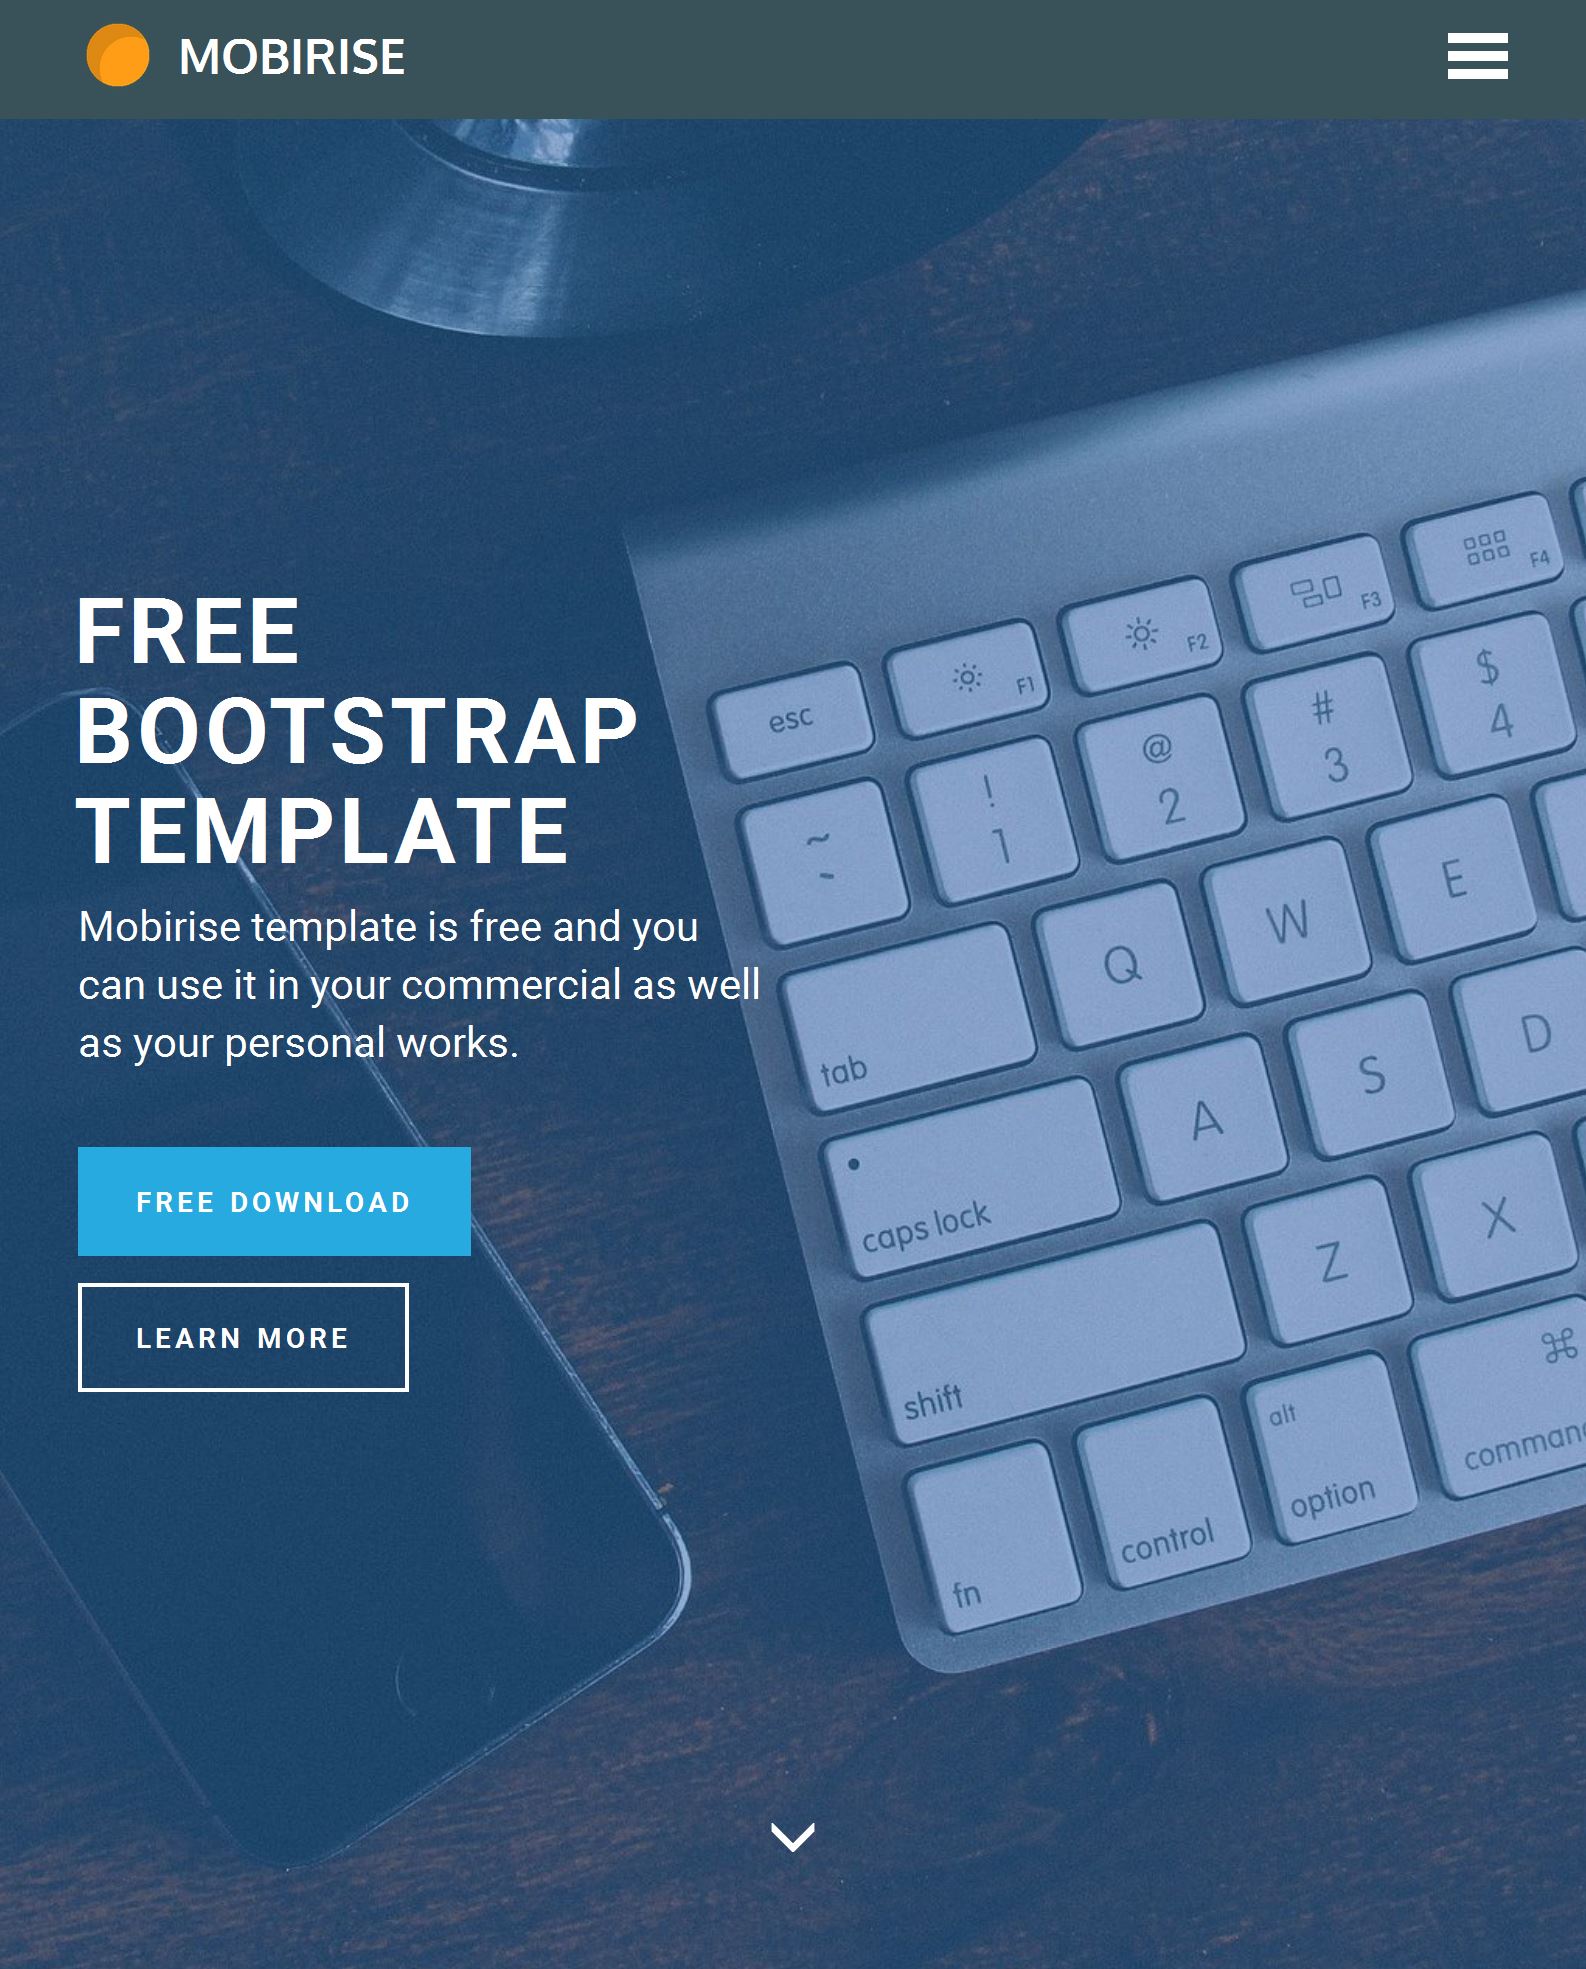 30+ Excellent Free HTML5 Bootstrap Templates 2021